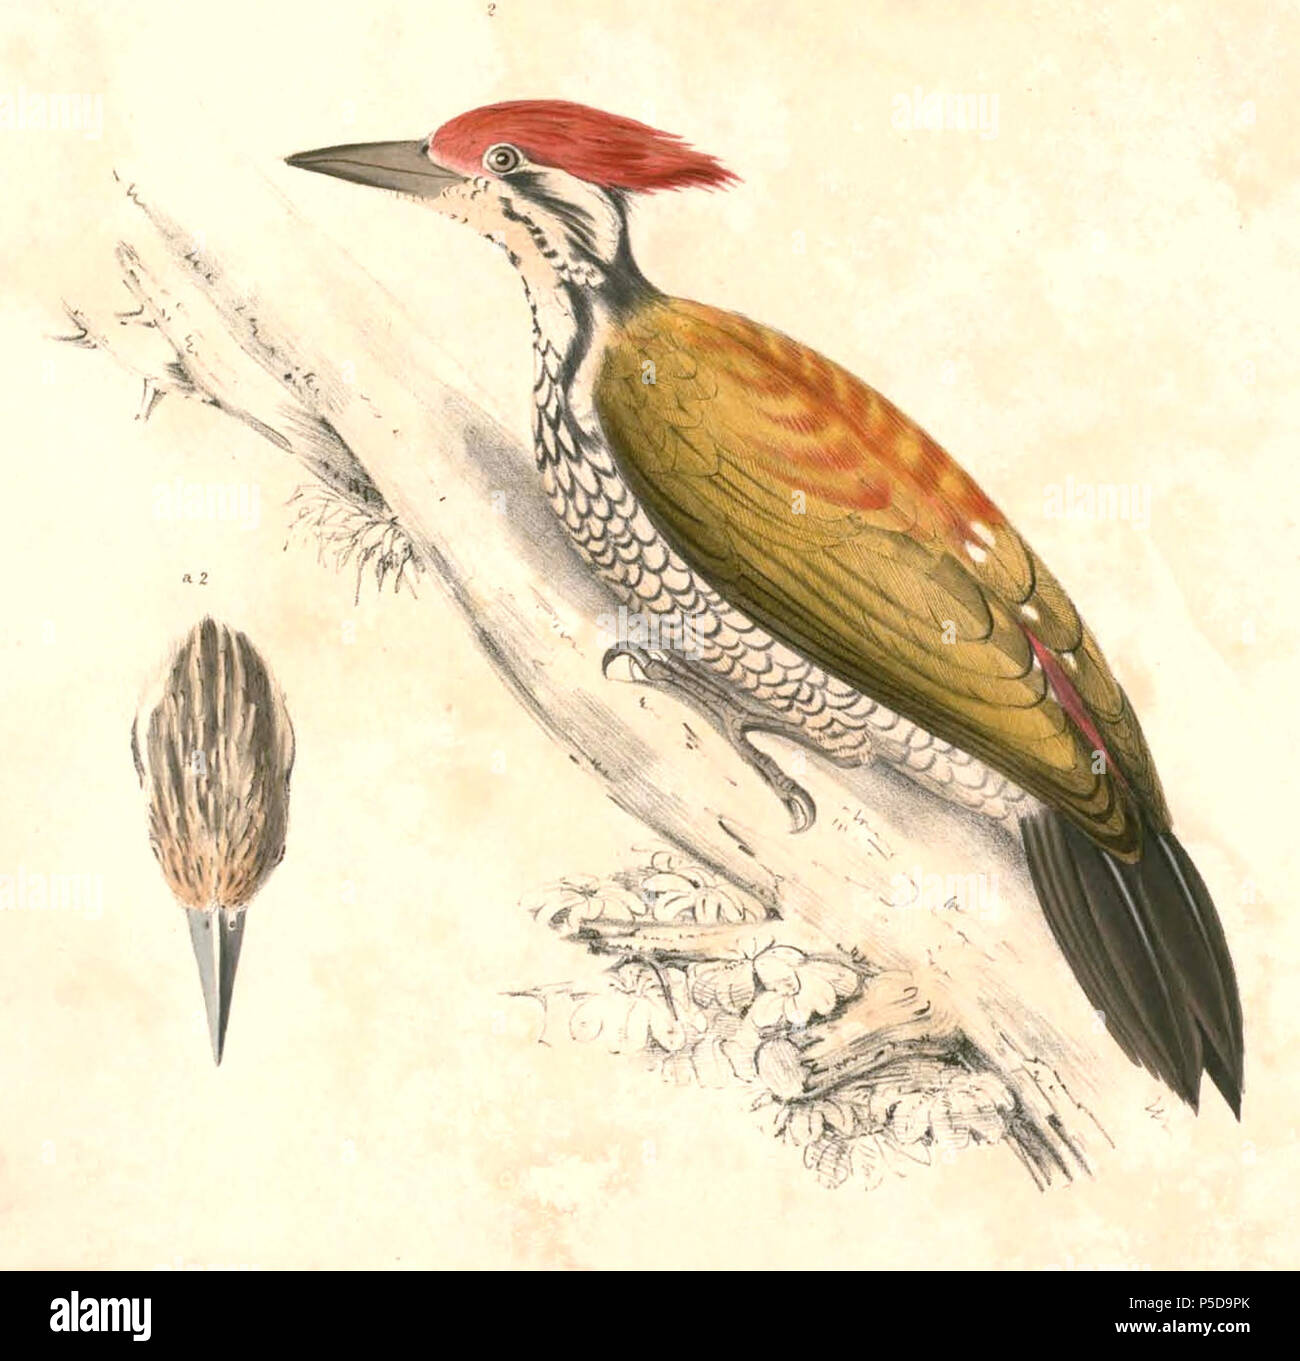 N/A.  English: « Picus tiga » = Dinopium javanense javanense (Subspecies of Common Flameback) Français: « Picus tiga » = Dinopium javanense javanense (Sous-espèce de Pic à dos rouge) . between 1830 and 1832.   Thomas Hardwicke  (1755–1835)     Alternative names Hardw.  Description English soldier and naturalist  Date of birth/death 1755 3 May 1835  Location of birth/death London Borough of Lambeth  Authority control  : Q2543258 VIAF:308180676 LCCN:nb2013018703 Botanist:Hardw. SUDOC:183009134 WorldCat 455 Dinopium javanense javanense Hardwicke Stock Photo